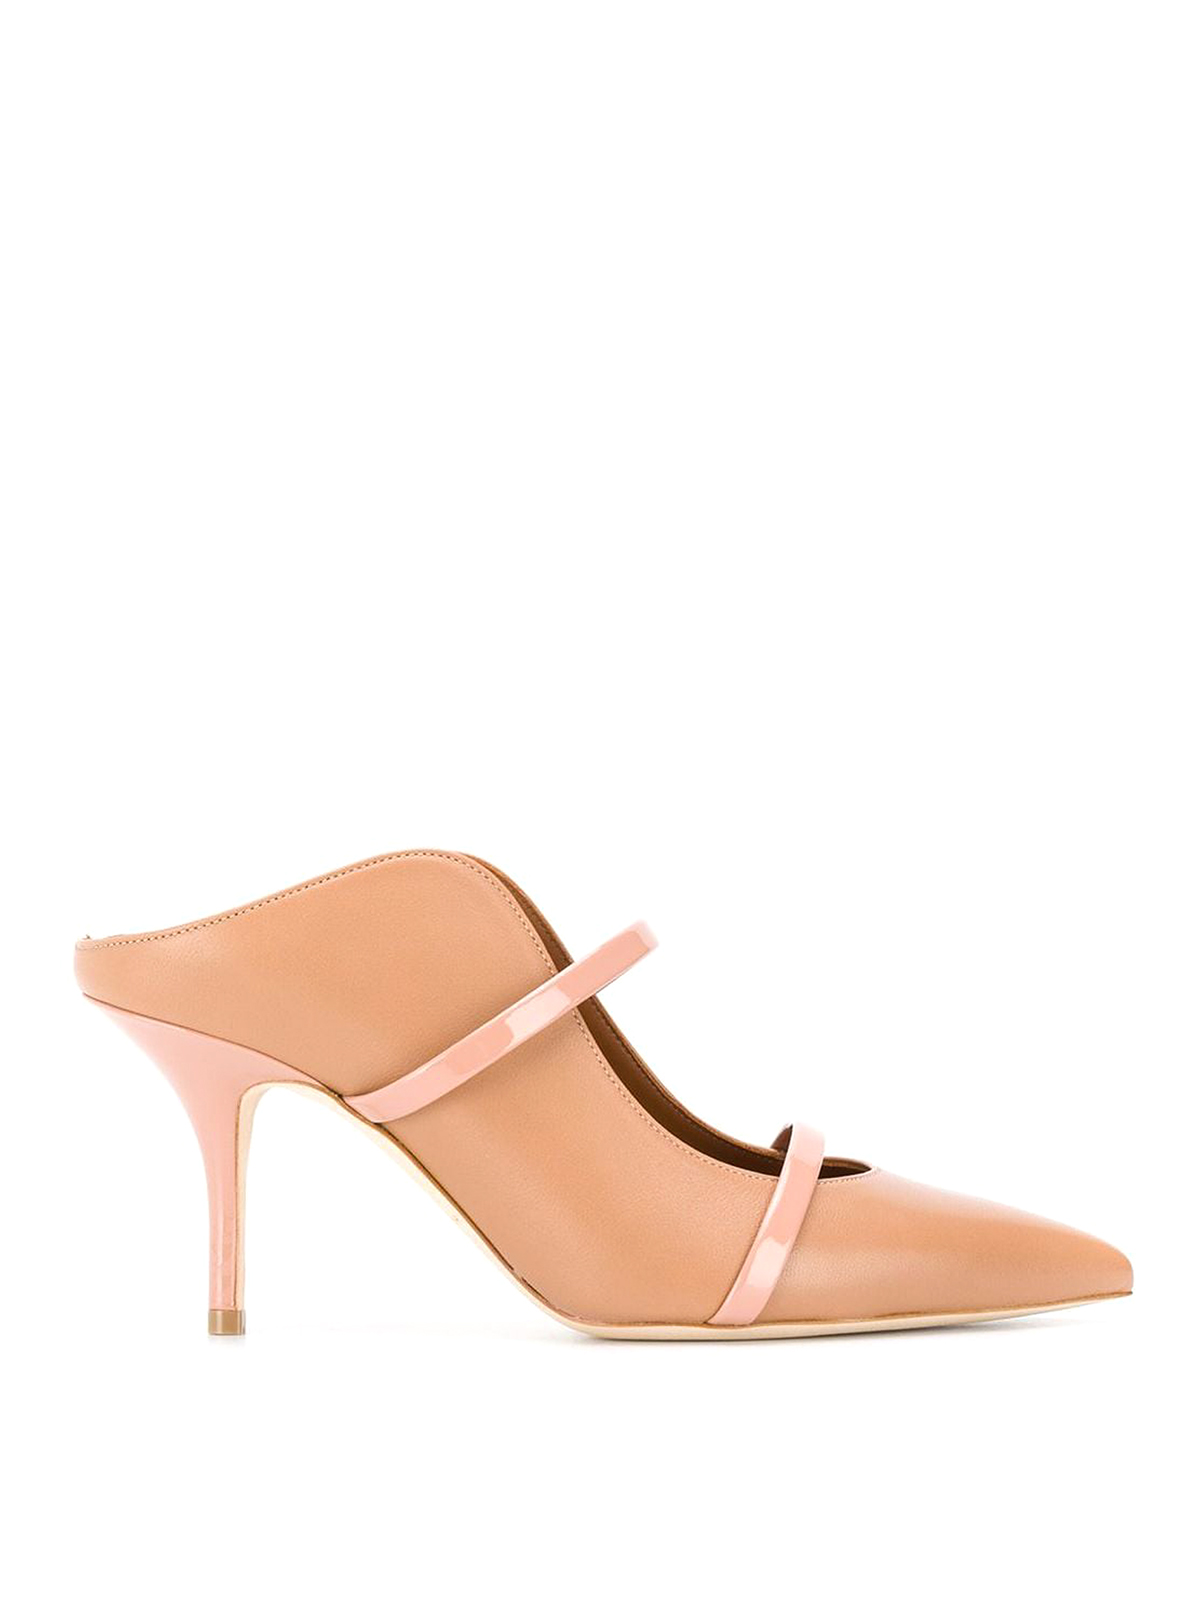 Malone Souliers Maureen Leather Pumps In Rosado Claro